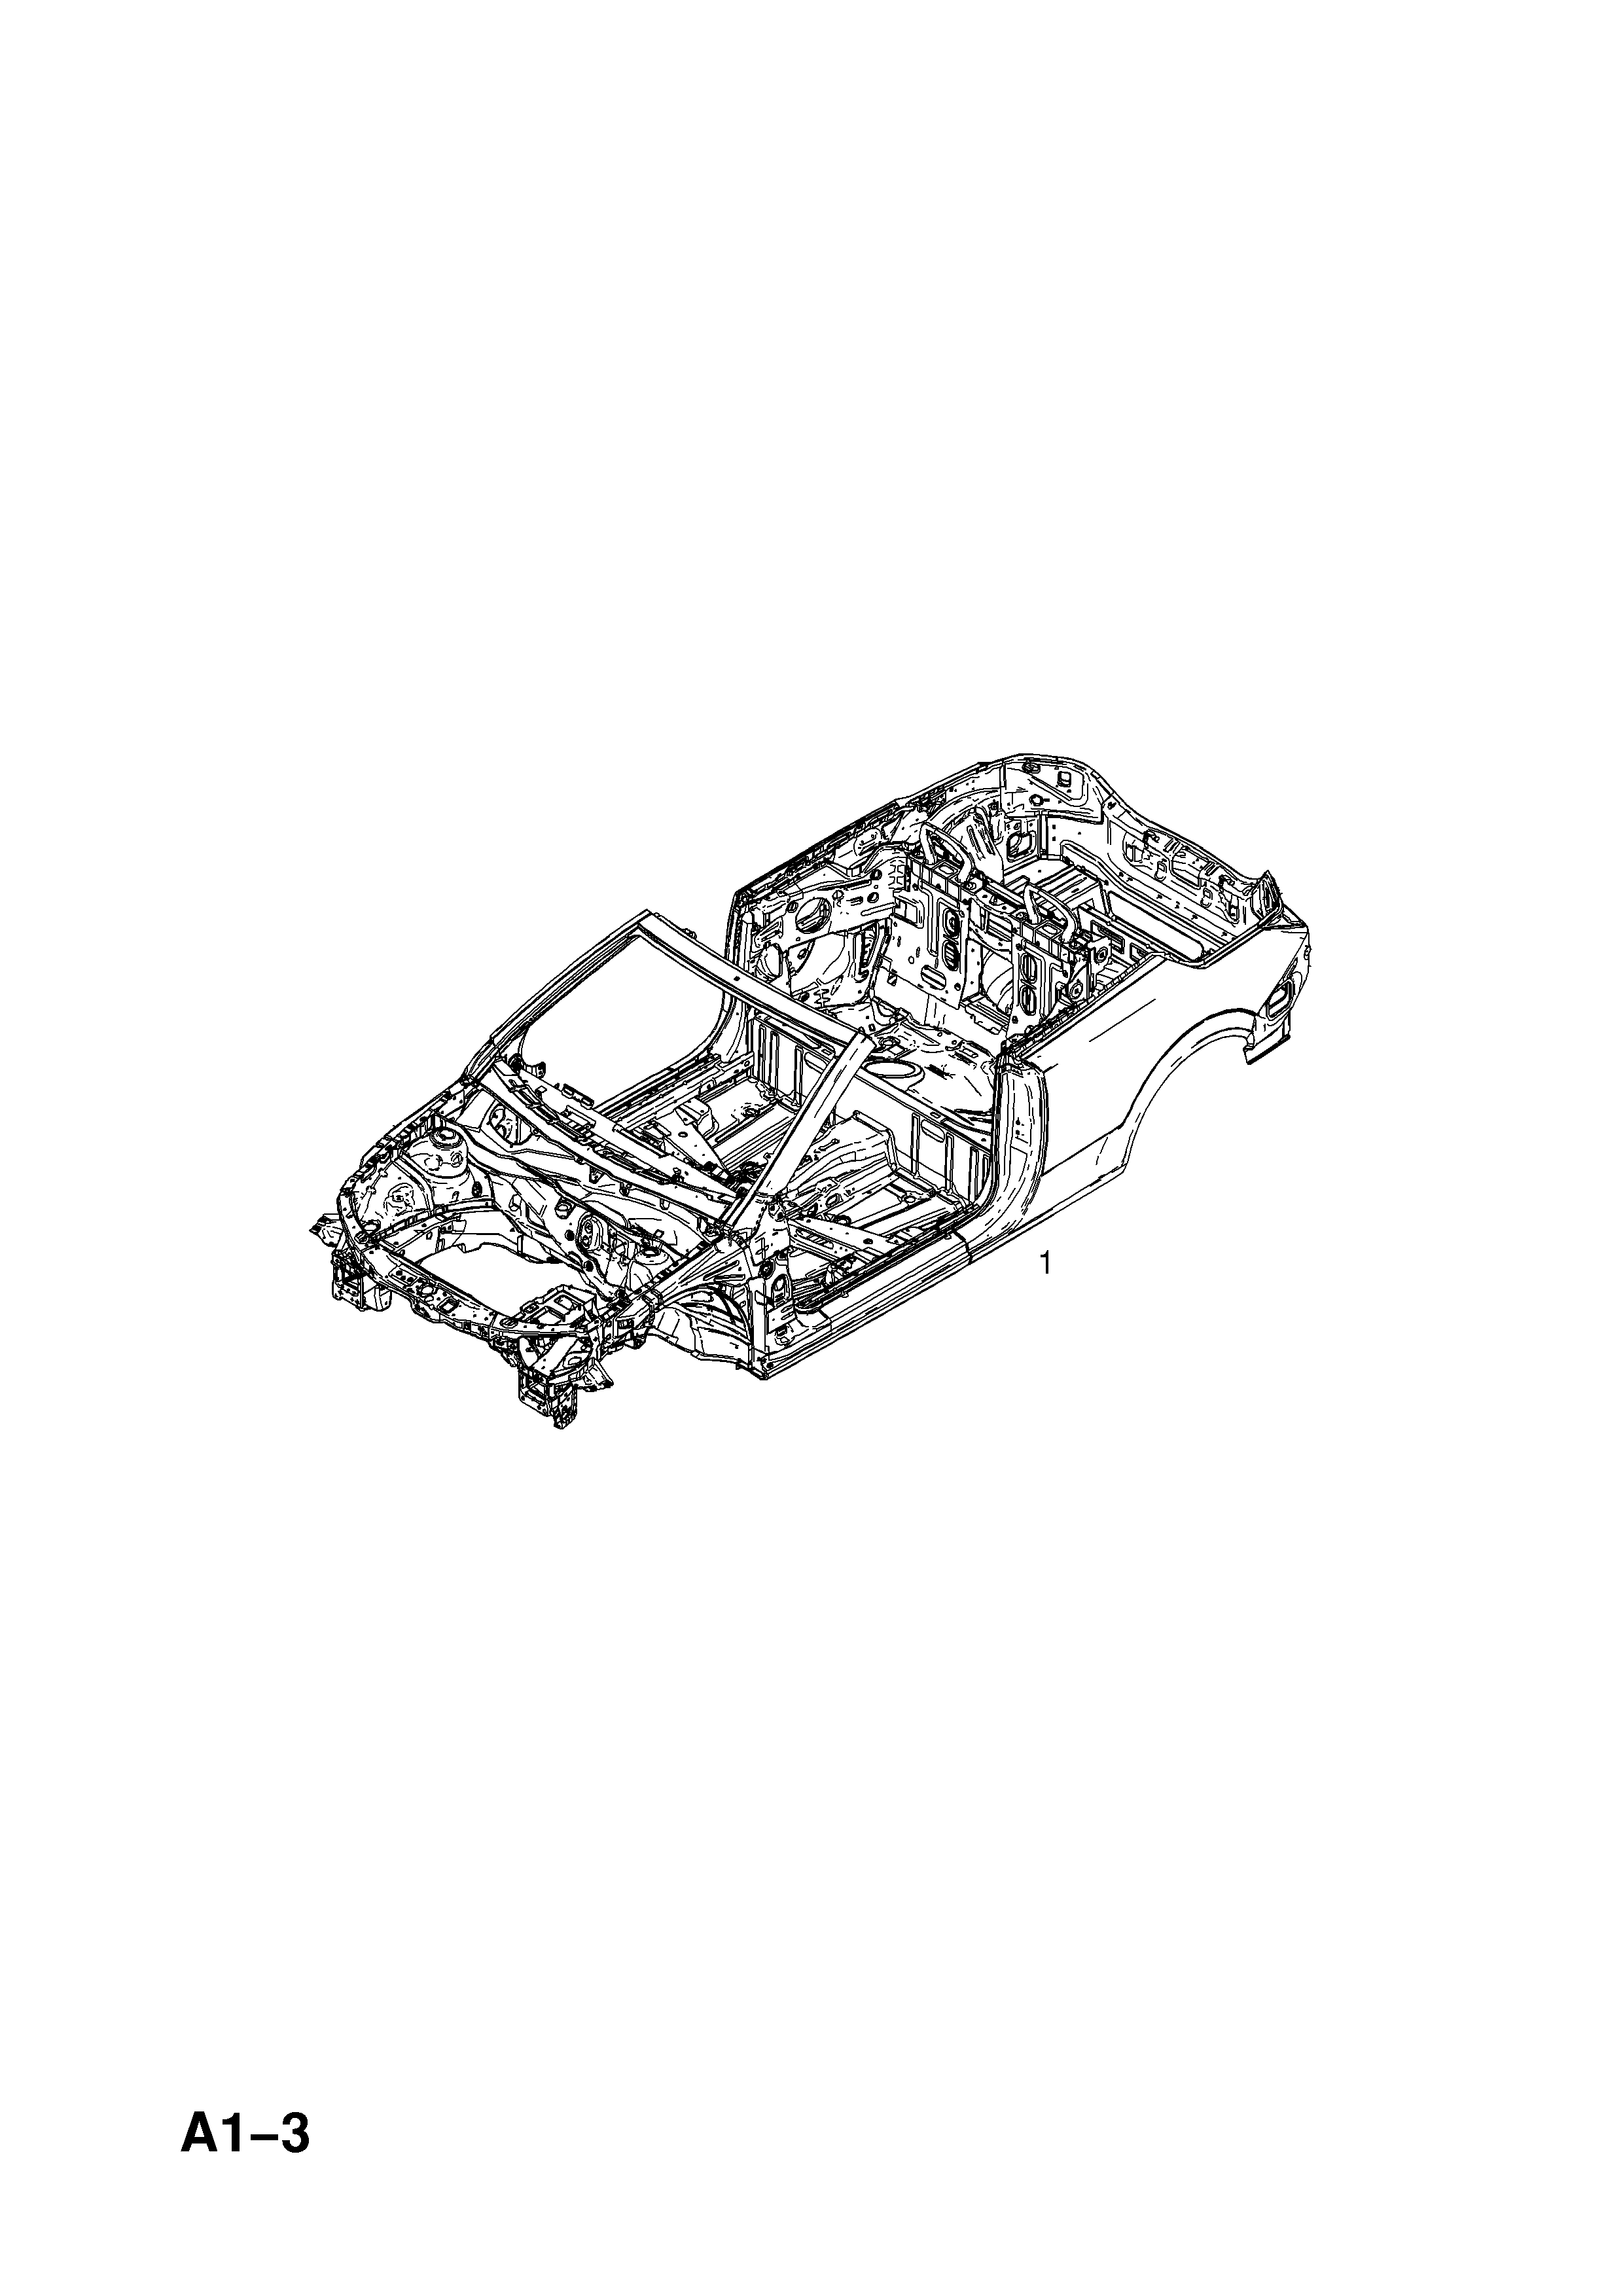 CAISSE (SUITE) <small><i>[CABRIOLET (L67)]</i></small>